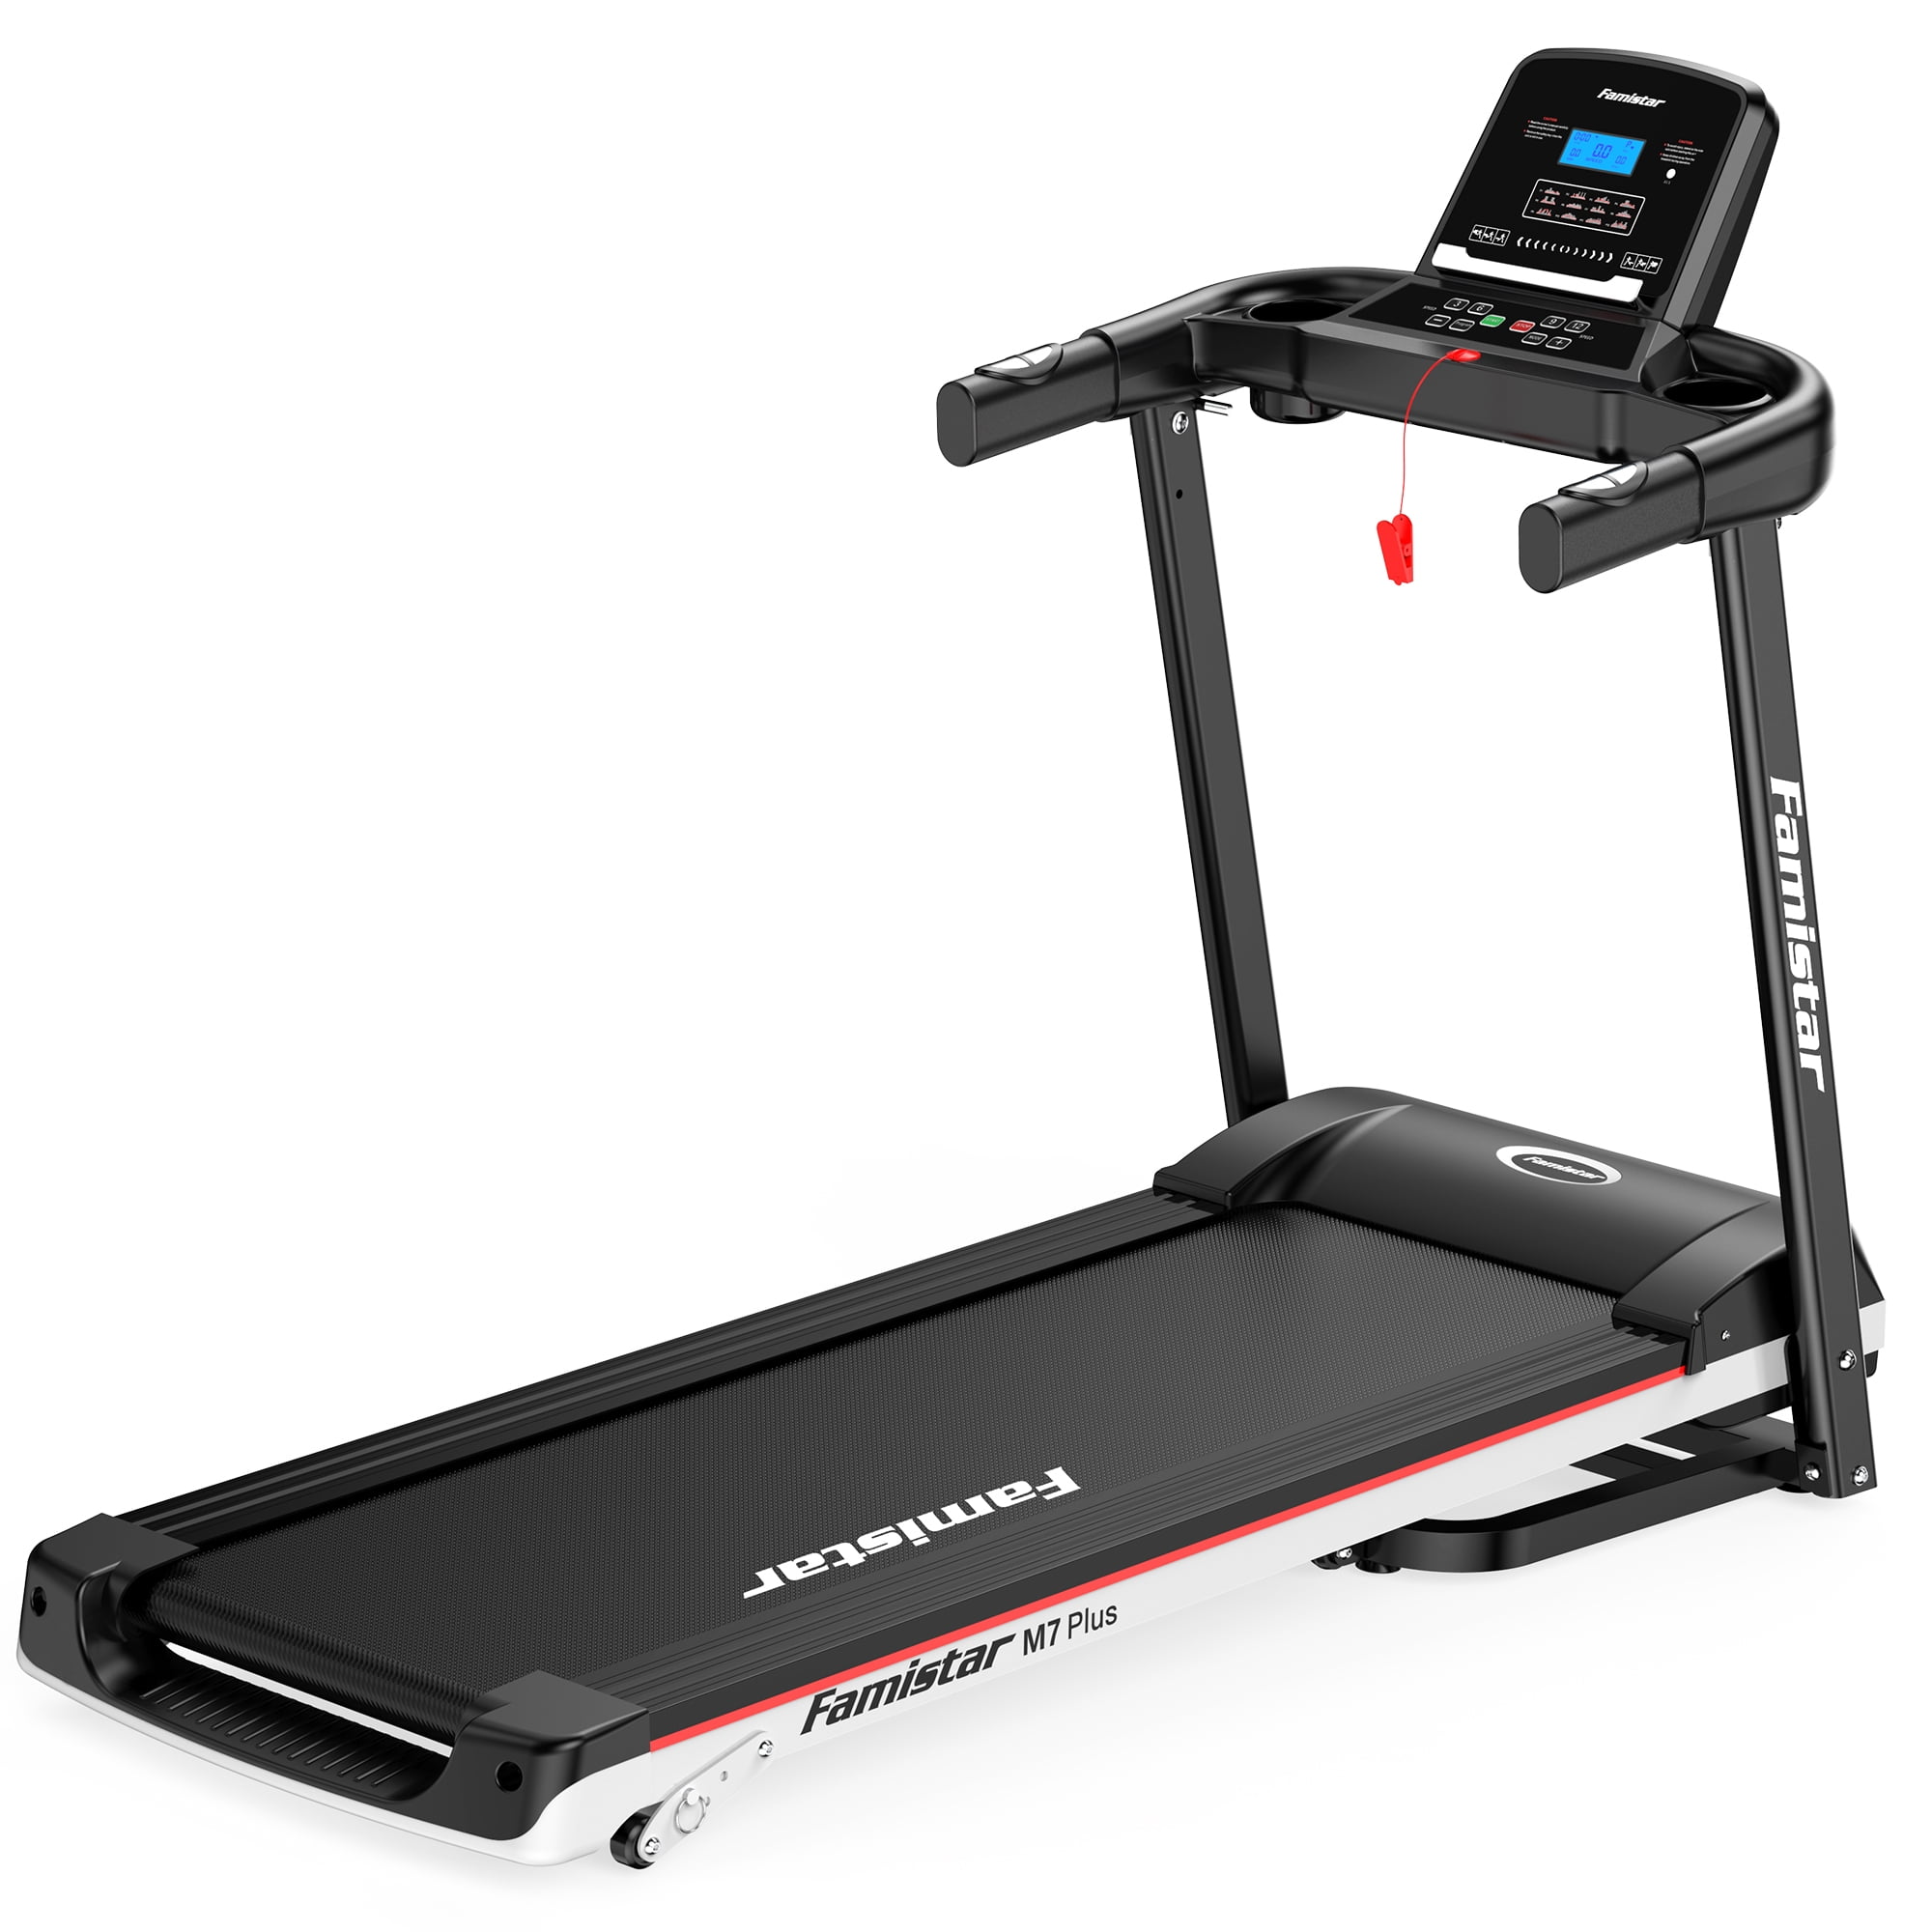 Details about   SYTIRY 2.25HP Folding Treadmill 2 in 1 Home Use Running with Bluetooth Speaker 